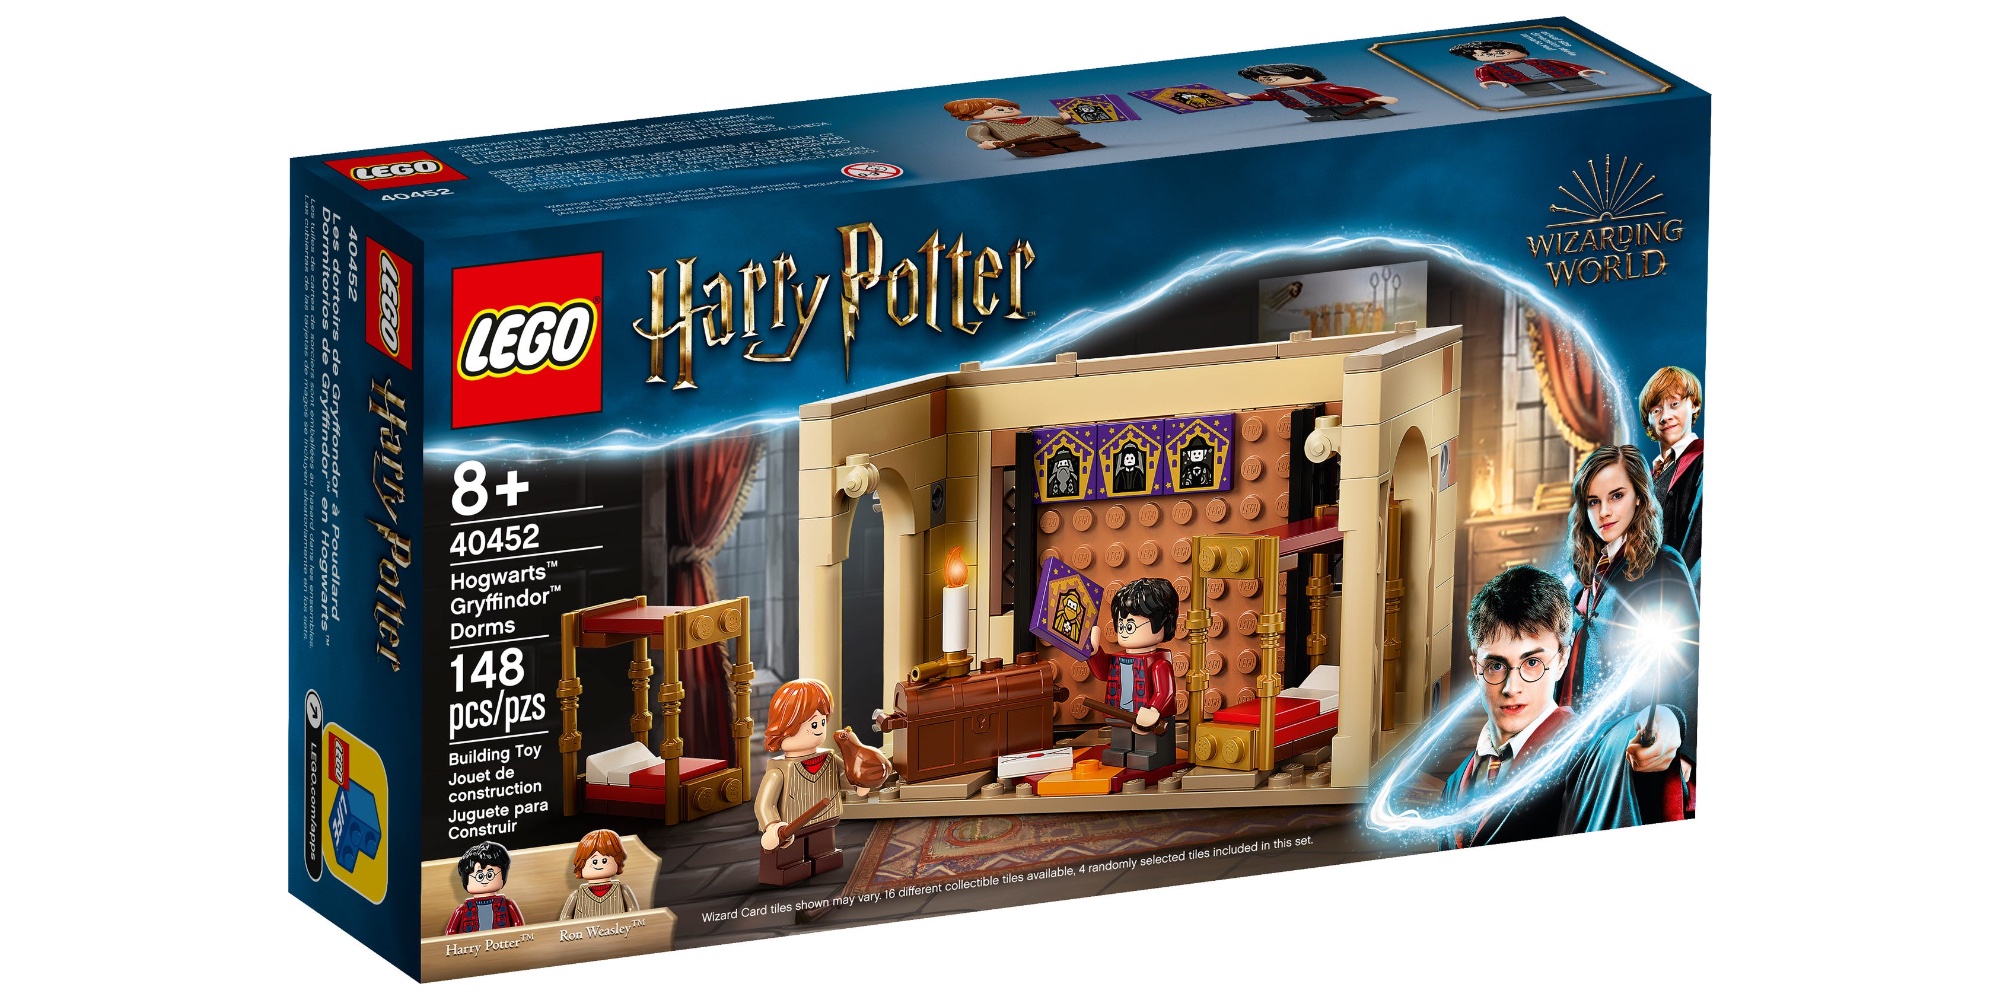 Arv jeg er syg Madison LEGO Gryffindor Dorms arrives as latest gift with purchase - 9to5Toys